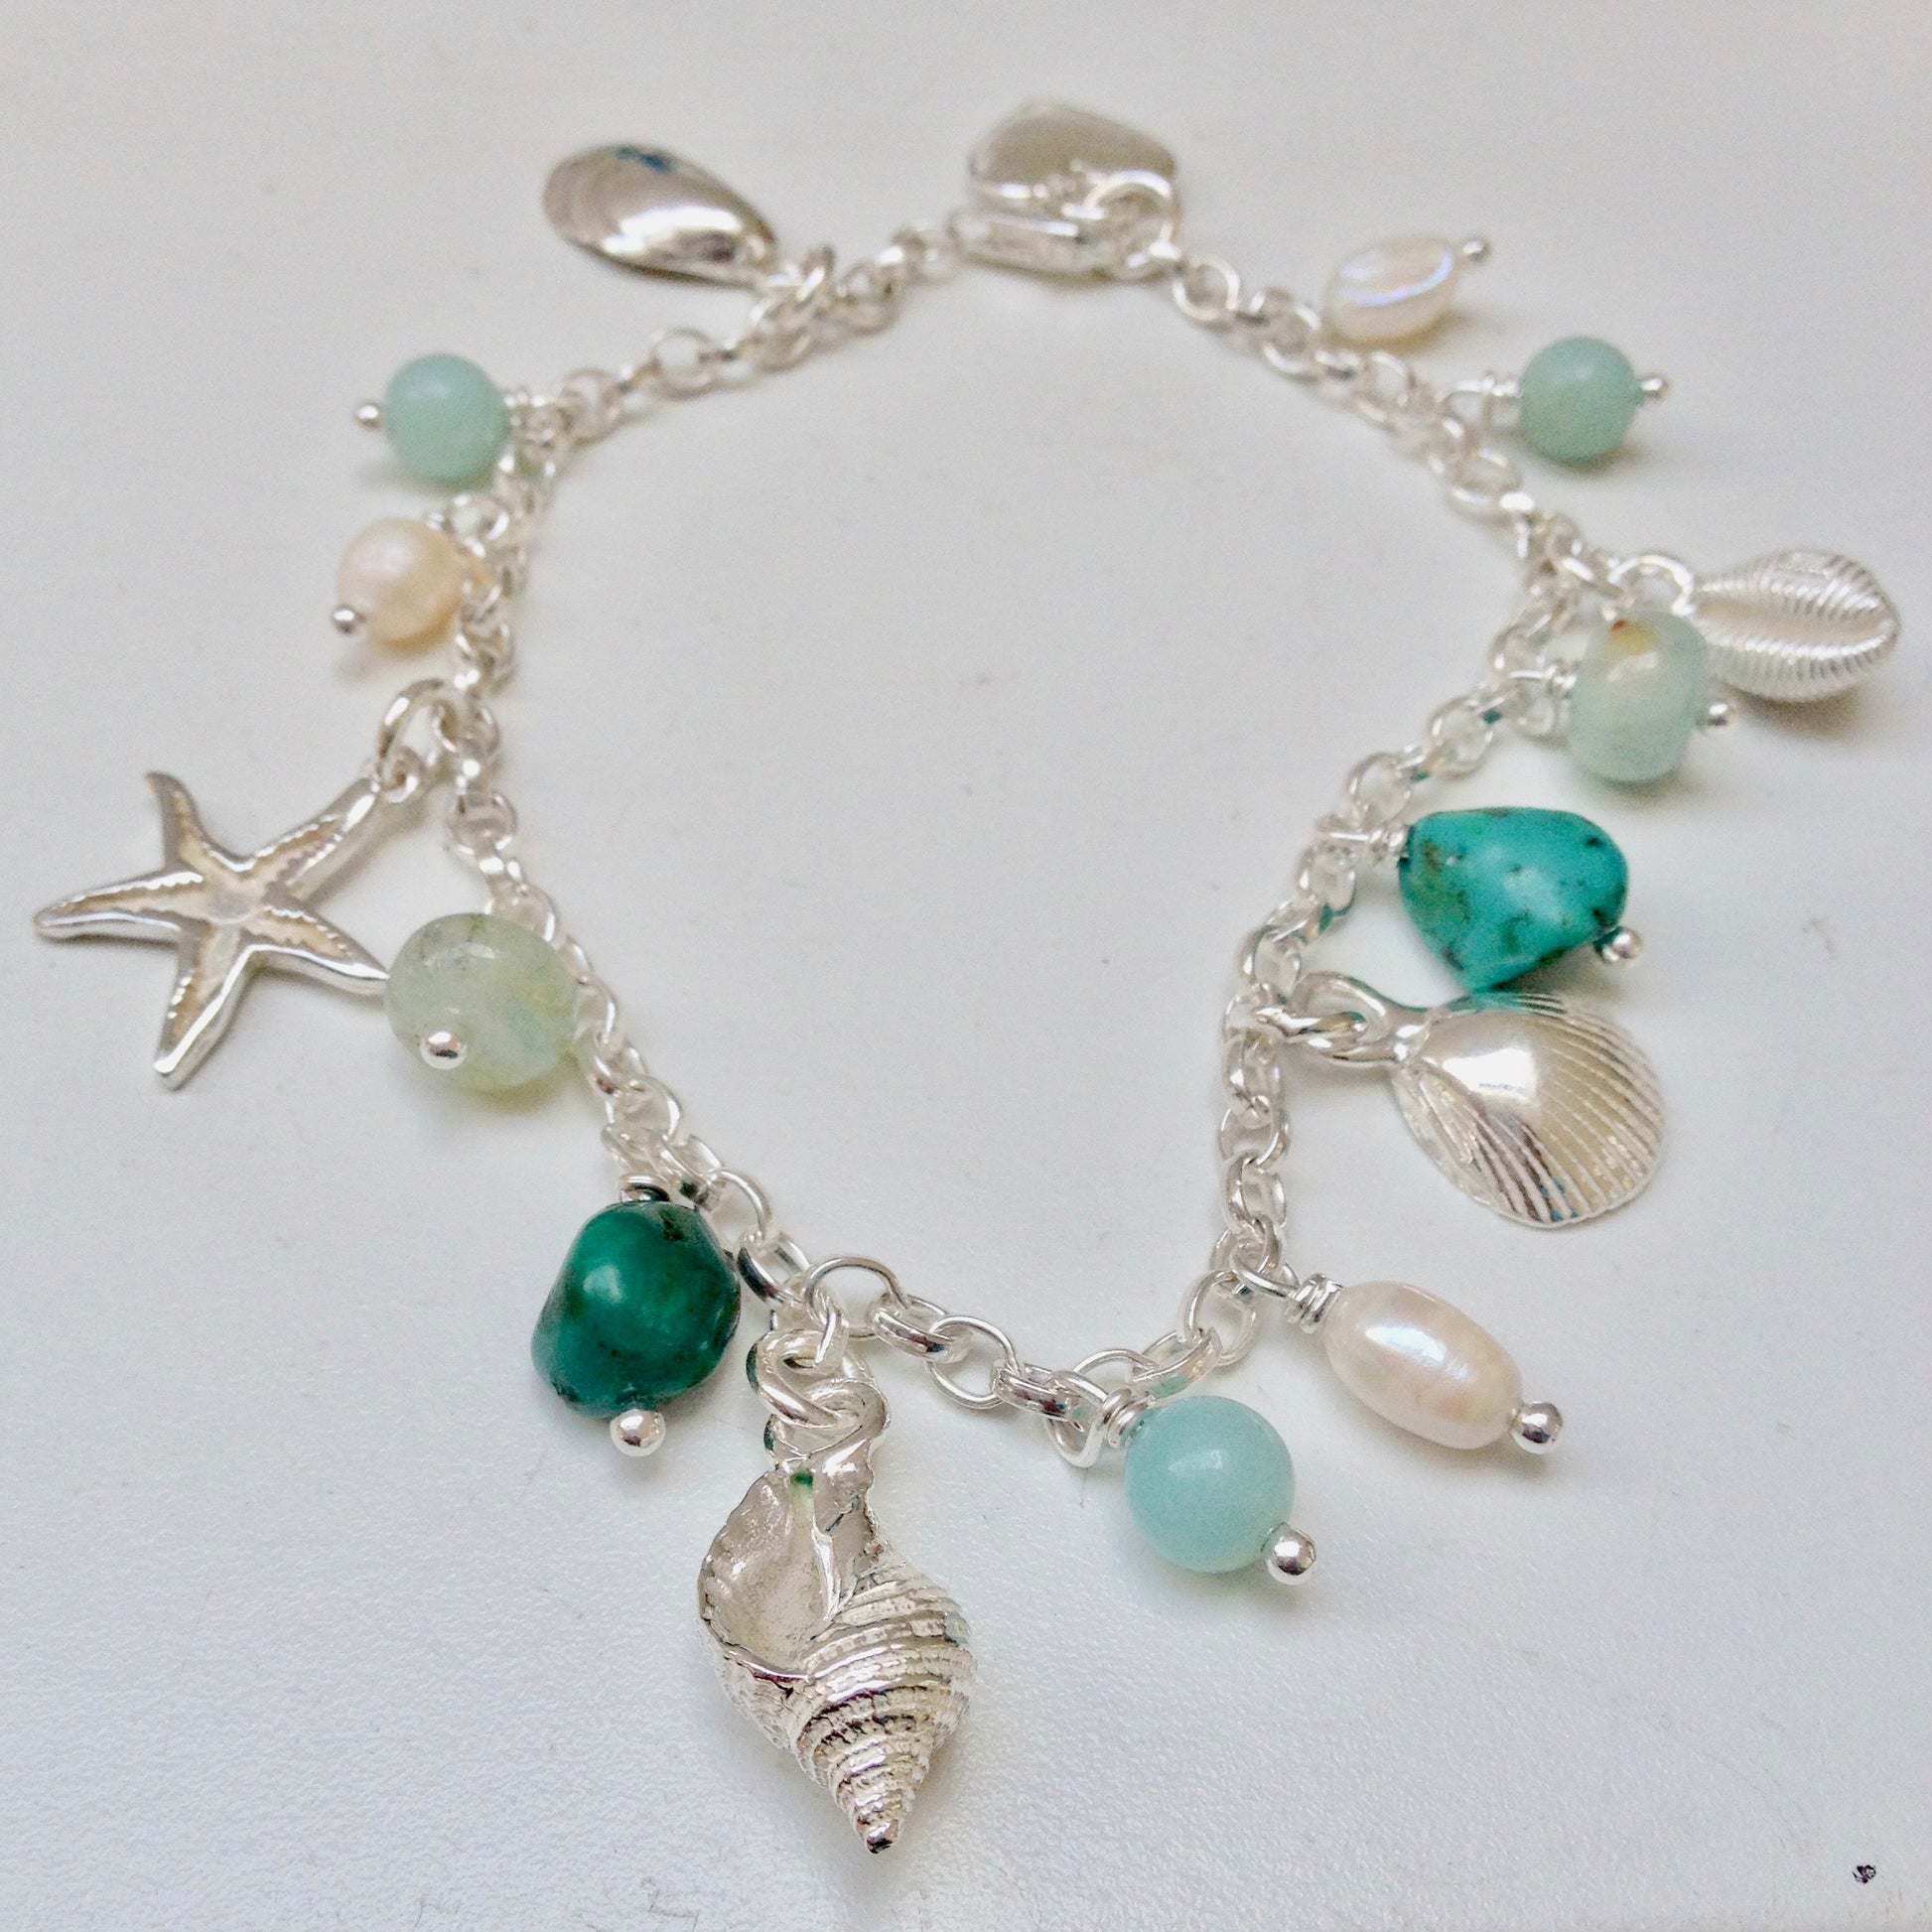 Sea shell bracelet with pearls and aqua coloured beads